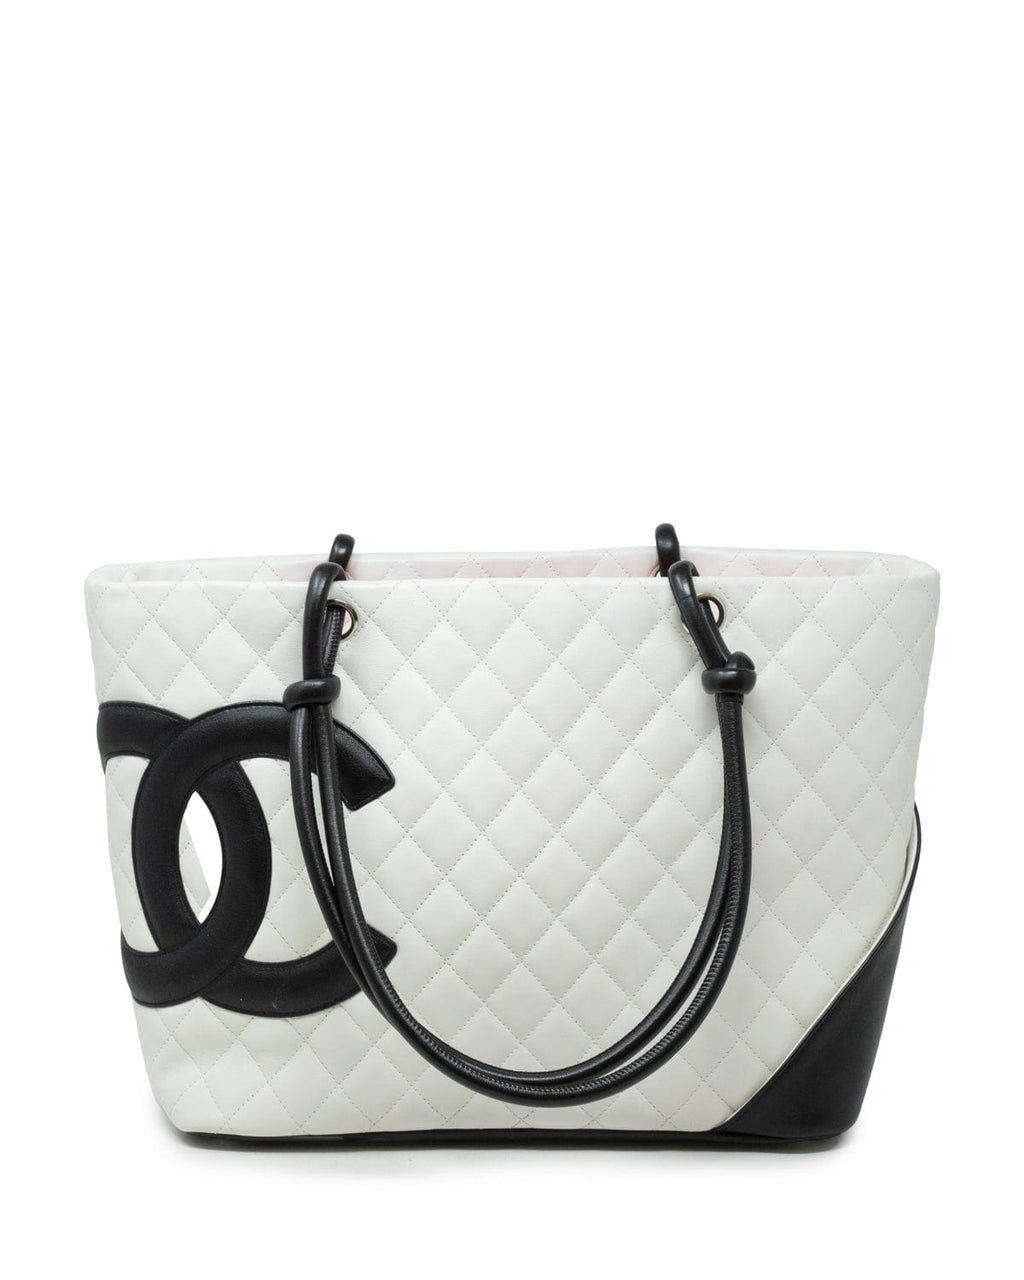 Bonhams  CHANEL 31 RUE CAMBON SHOPPING TOTEWHITE LEATHER includes serial  sticker authenticity card original dust bag